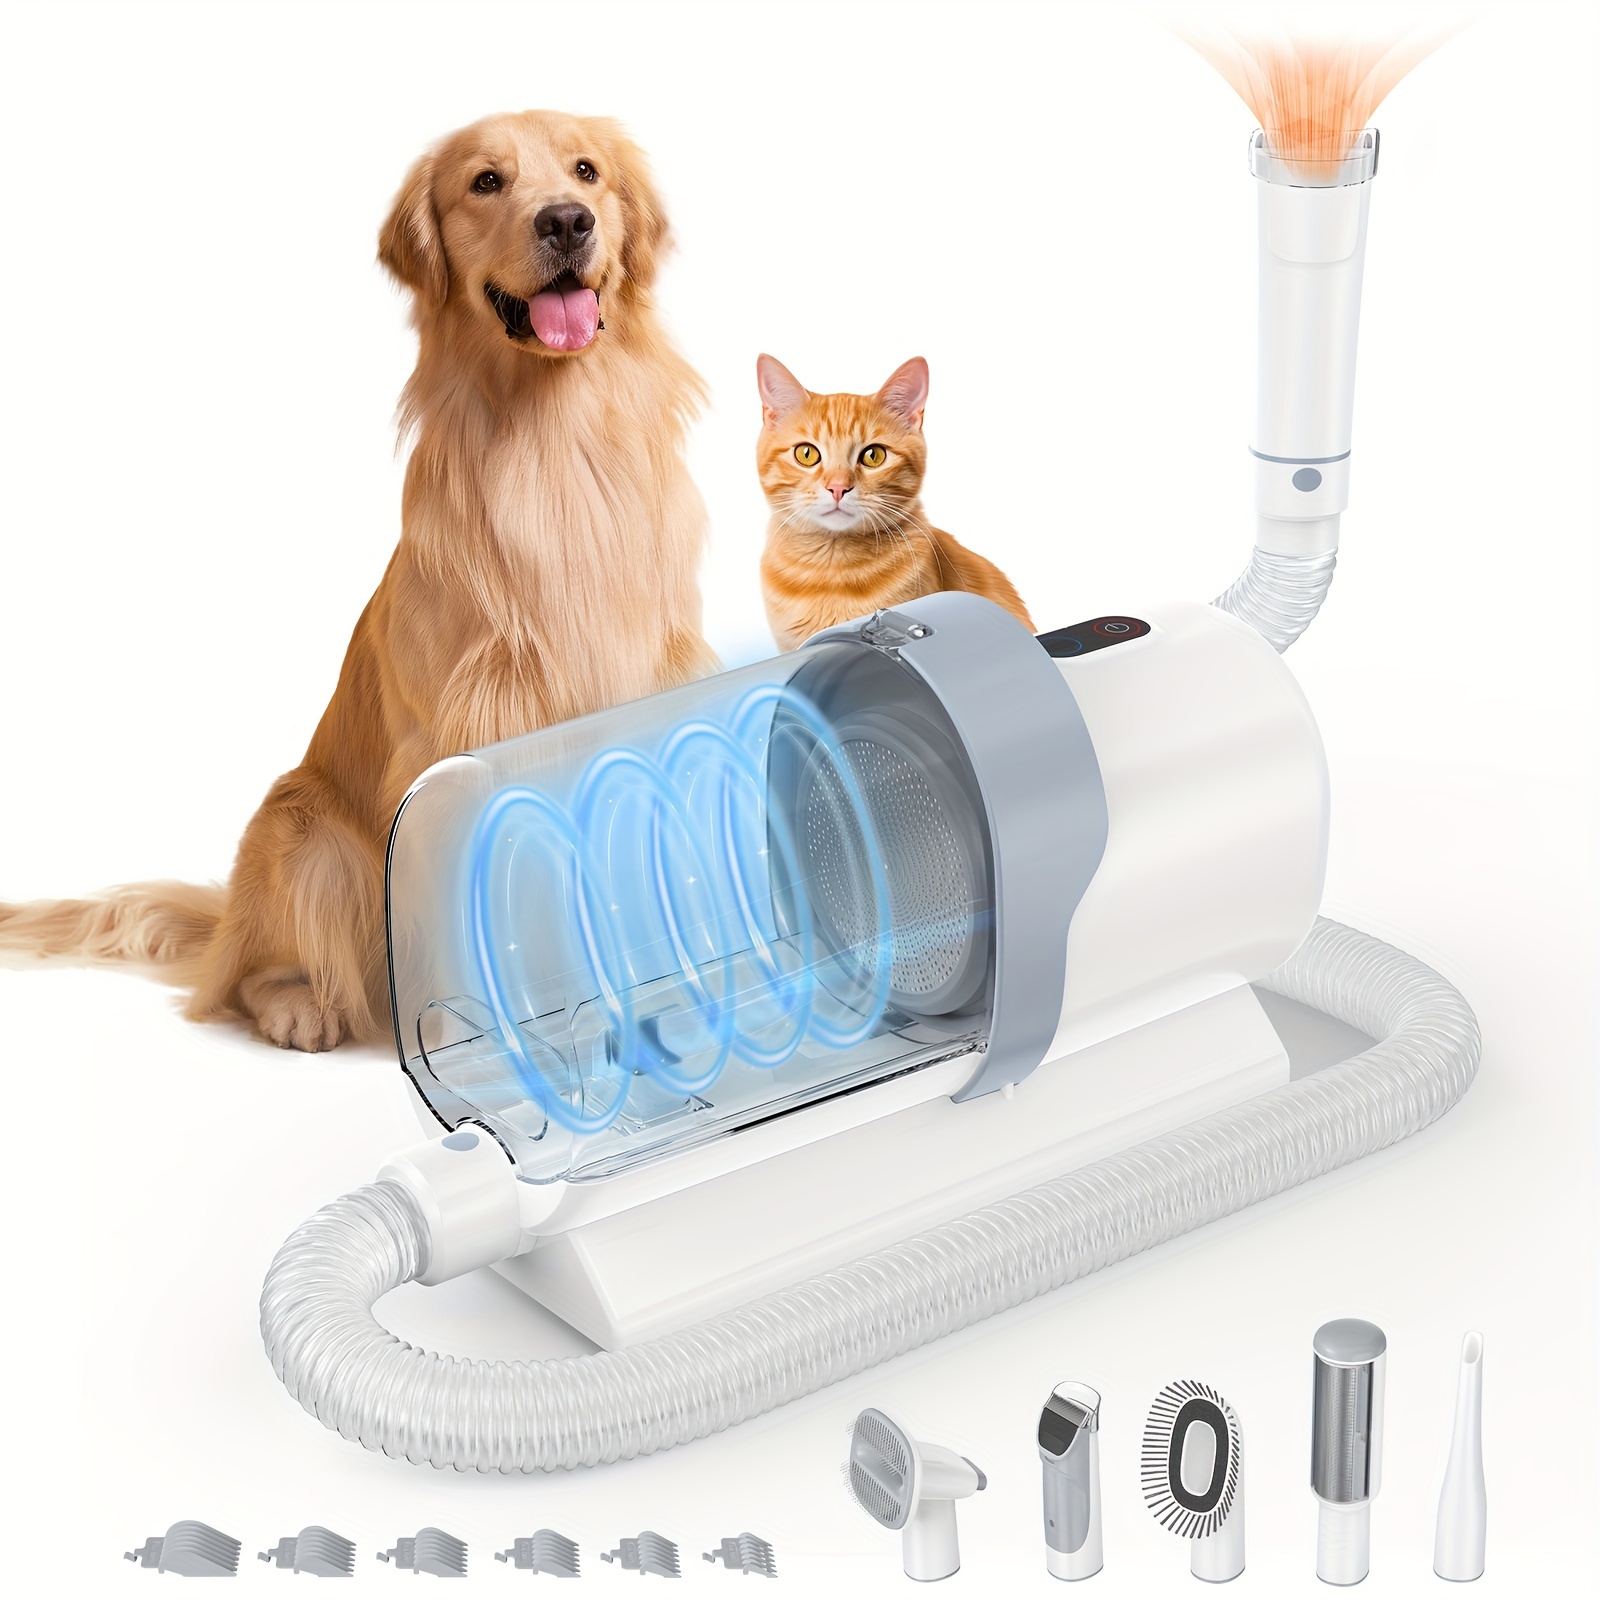 

Dog Hair Vacuum & Dog Grooming Kit, Pet Grooming Vacuum With Pet Clipper Nail Grinder, Dust Cup Dog Brush Vacuum With 6 Pet Grooming Tools For Shedding Pet Hair, Home Cleaning